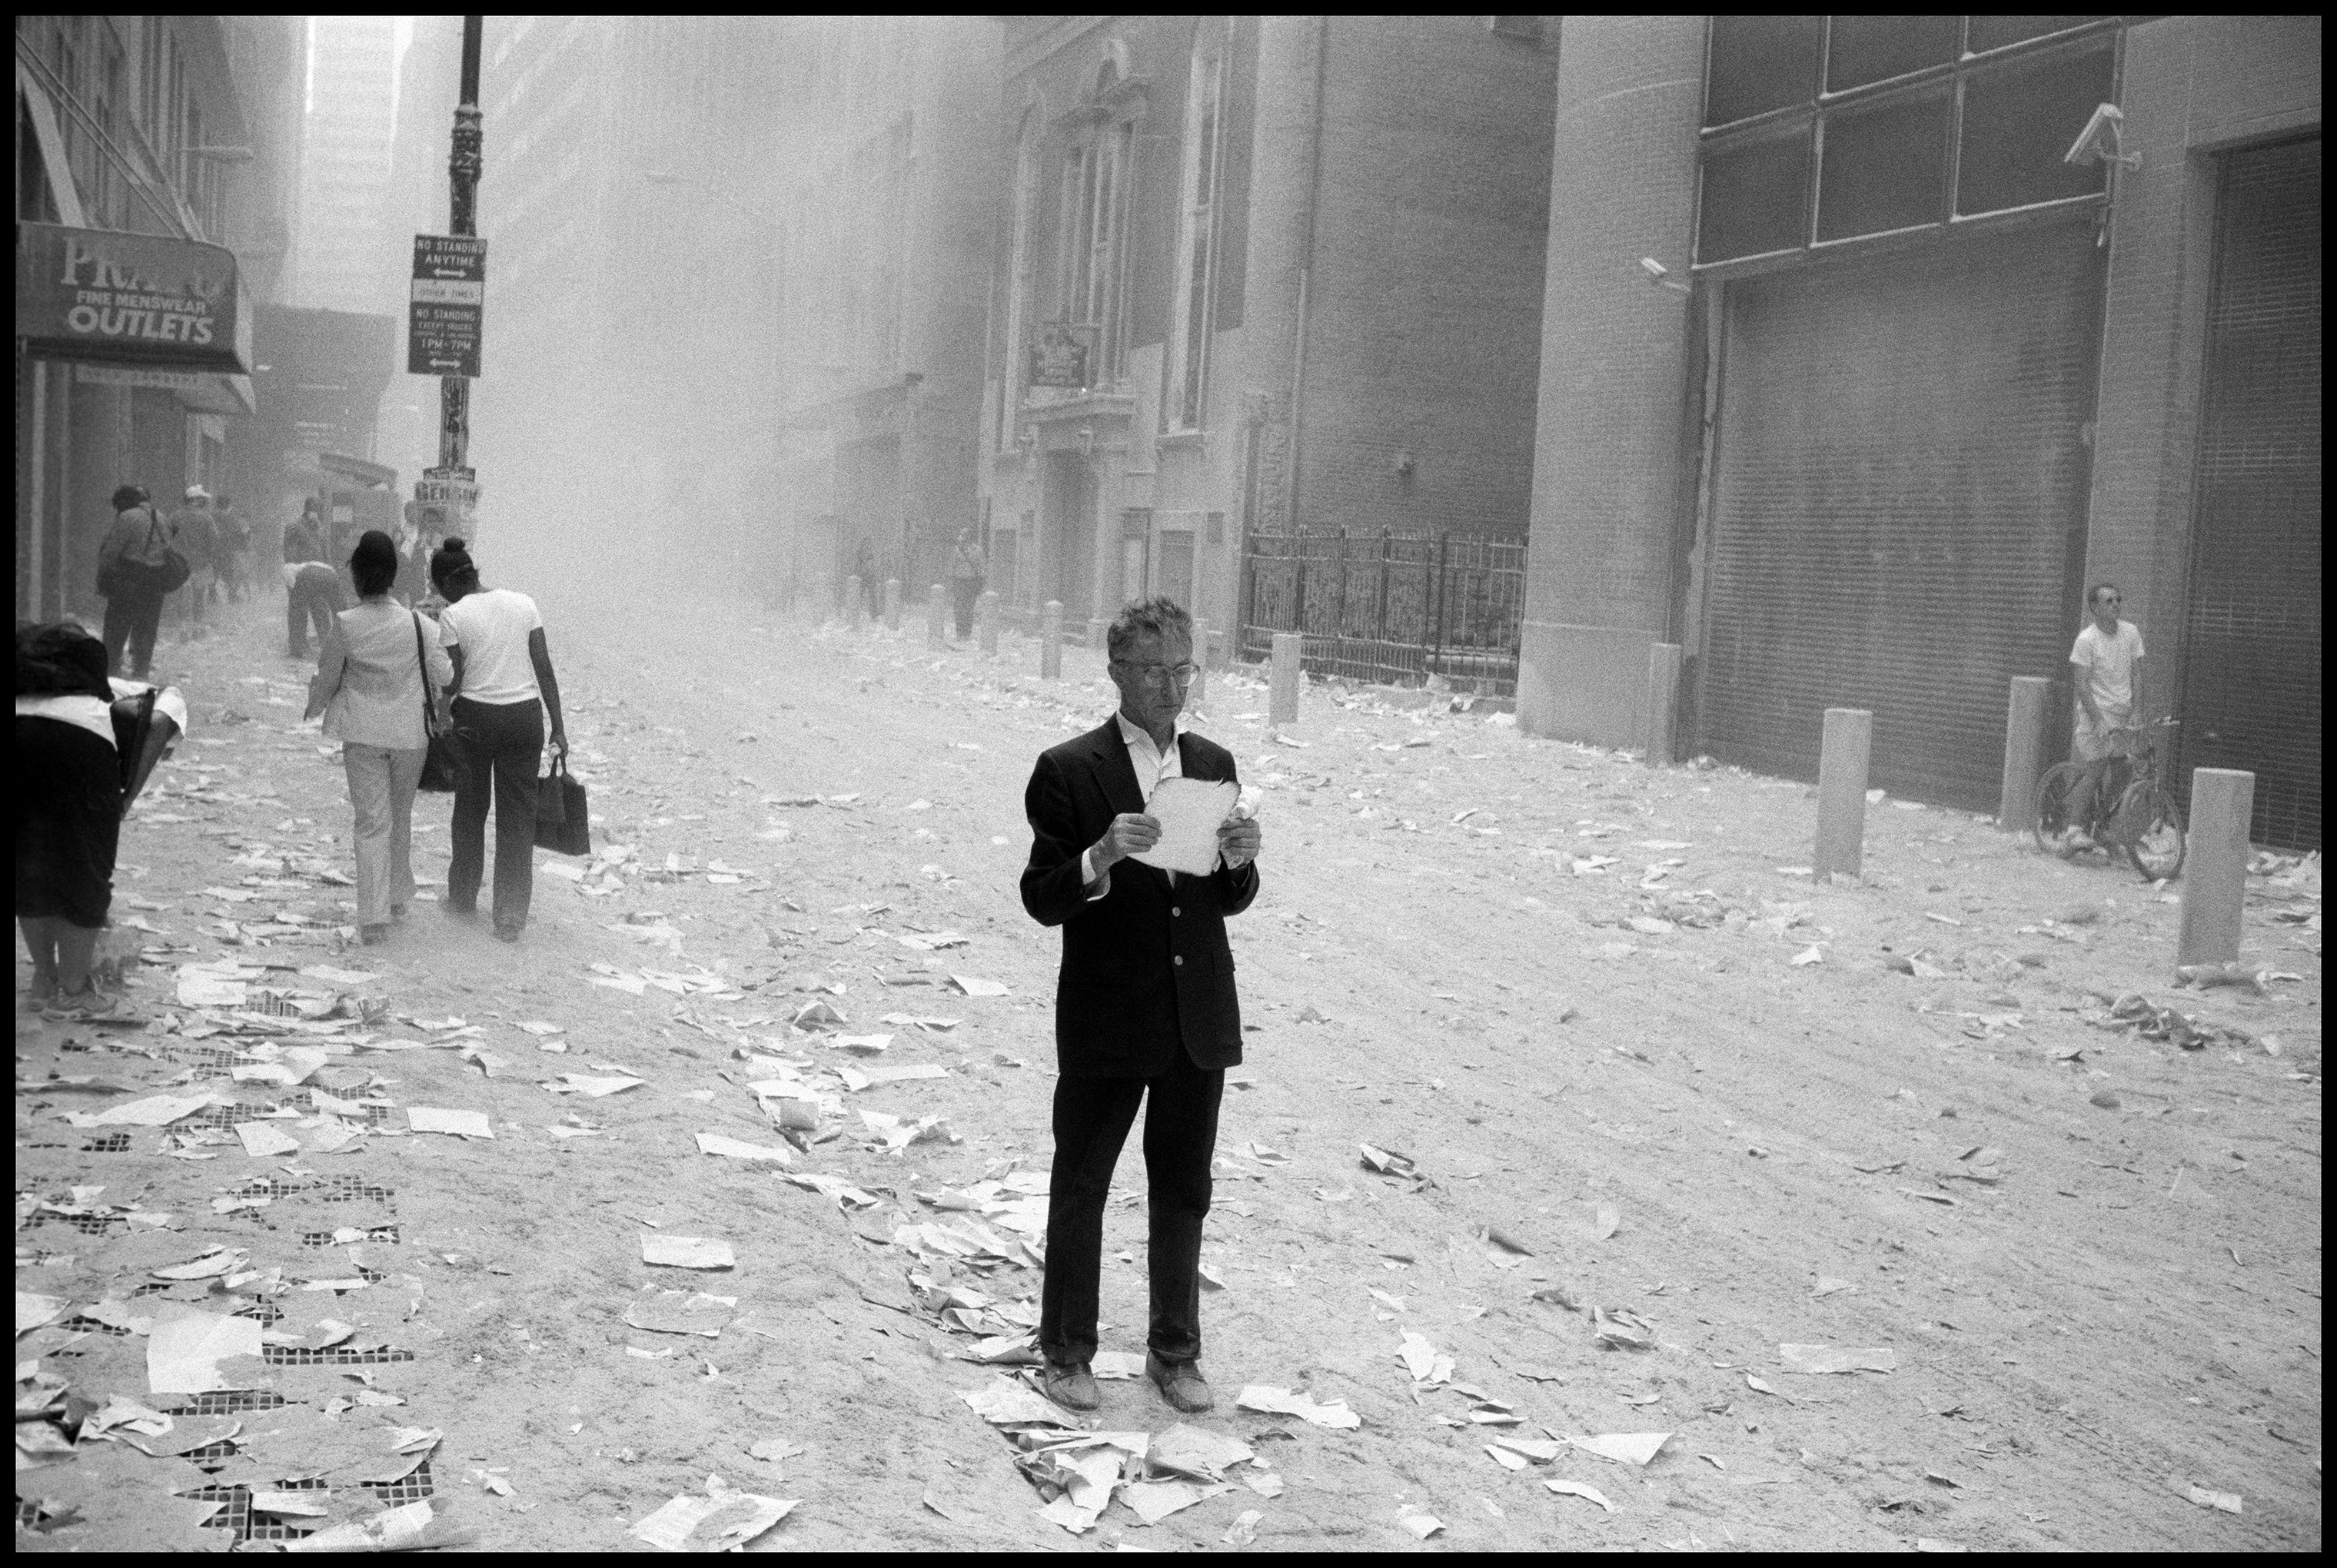 A man picks up a paper that was blown out of the towers after the attack of the World Trade Center on Sept. 11, 2001. (Larry Towell—Magnum Photos)